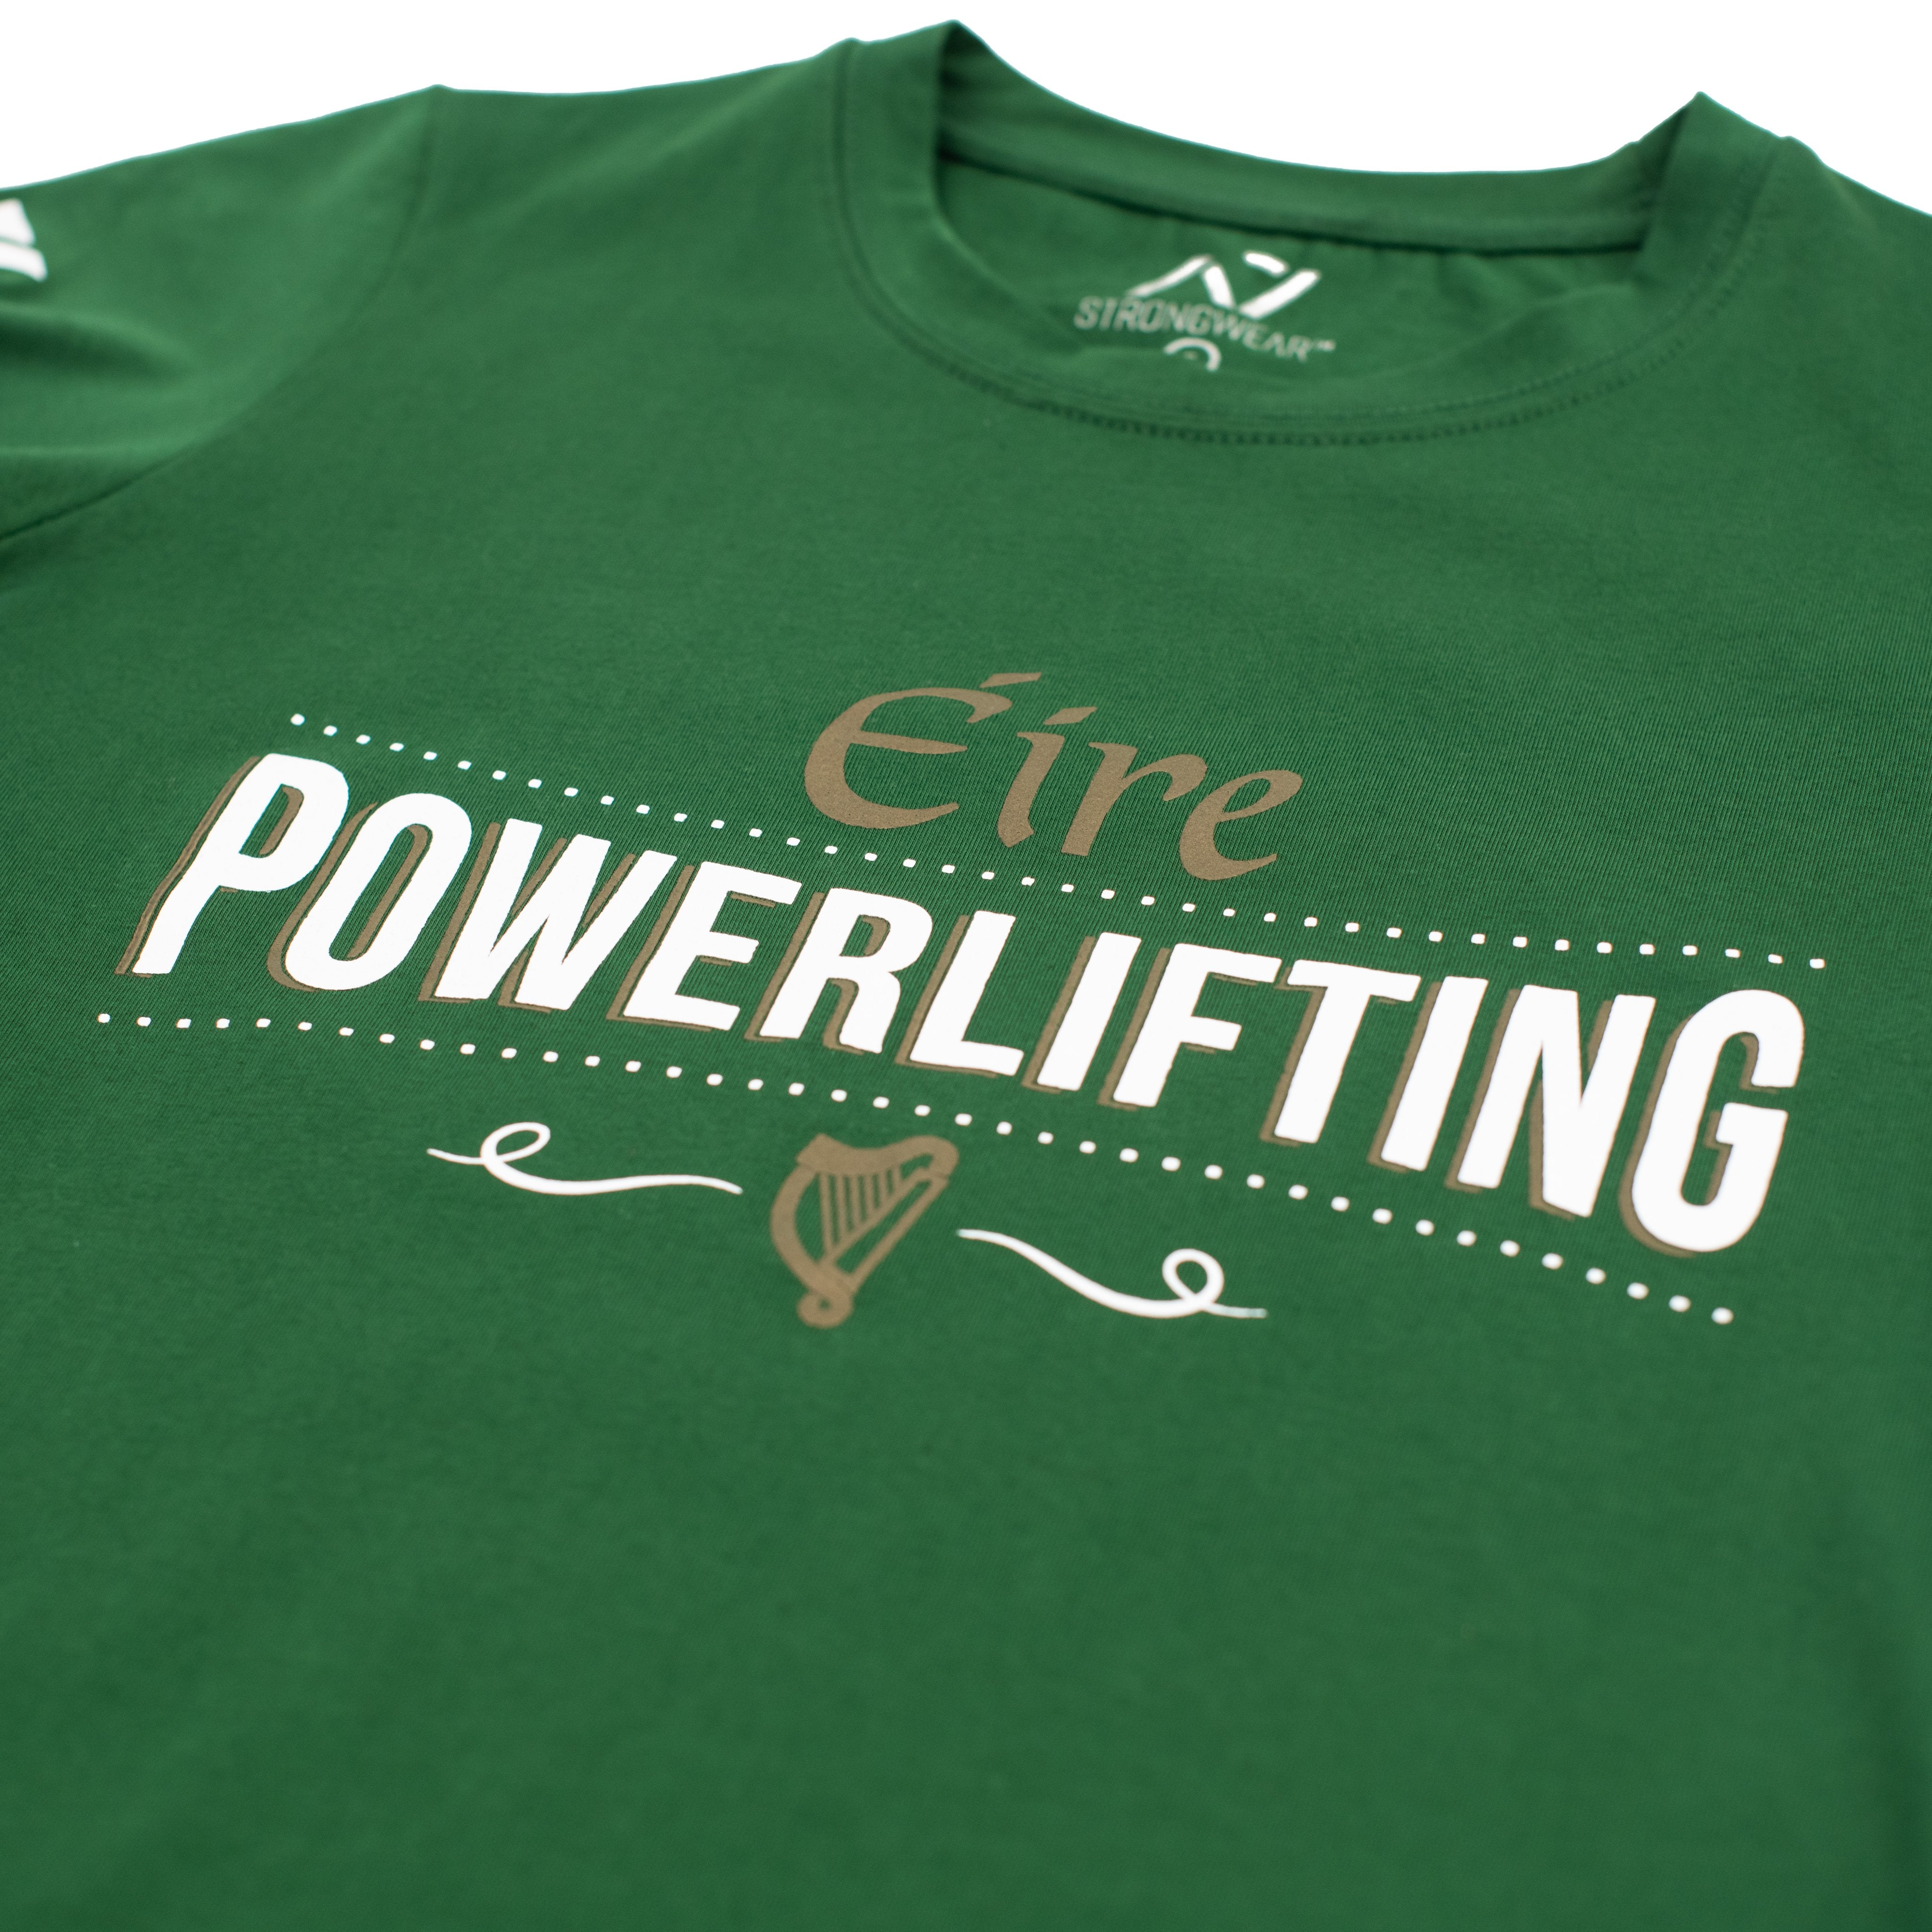 Eire Bar Grip T-shirt, great as a squat shirt. Purchase Eire Bar Grip tshirt from A7 Europe. Purchase Eire Bar Grip Shirt Europe from A7 Europe. No more chalk and no more sliding. Best Bar Grip Tshirts, shipping to Europe from A7 Europe. The best Powerlifting apparel for all your workouts. Available in UK and Europe including France, Italy, Germany, Sweden and Poland